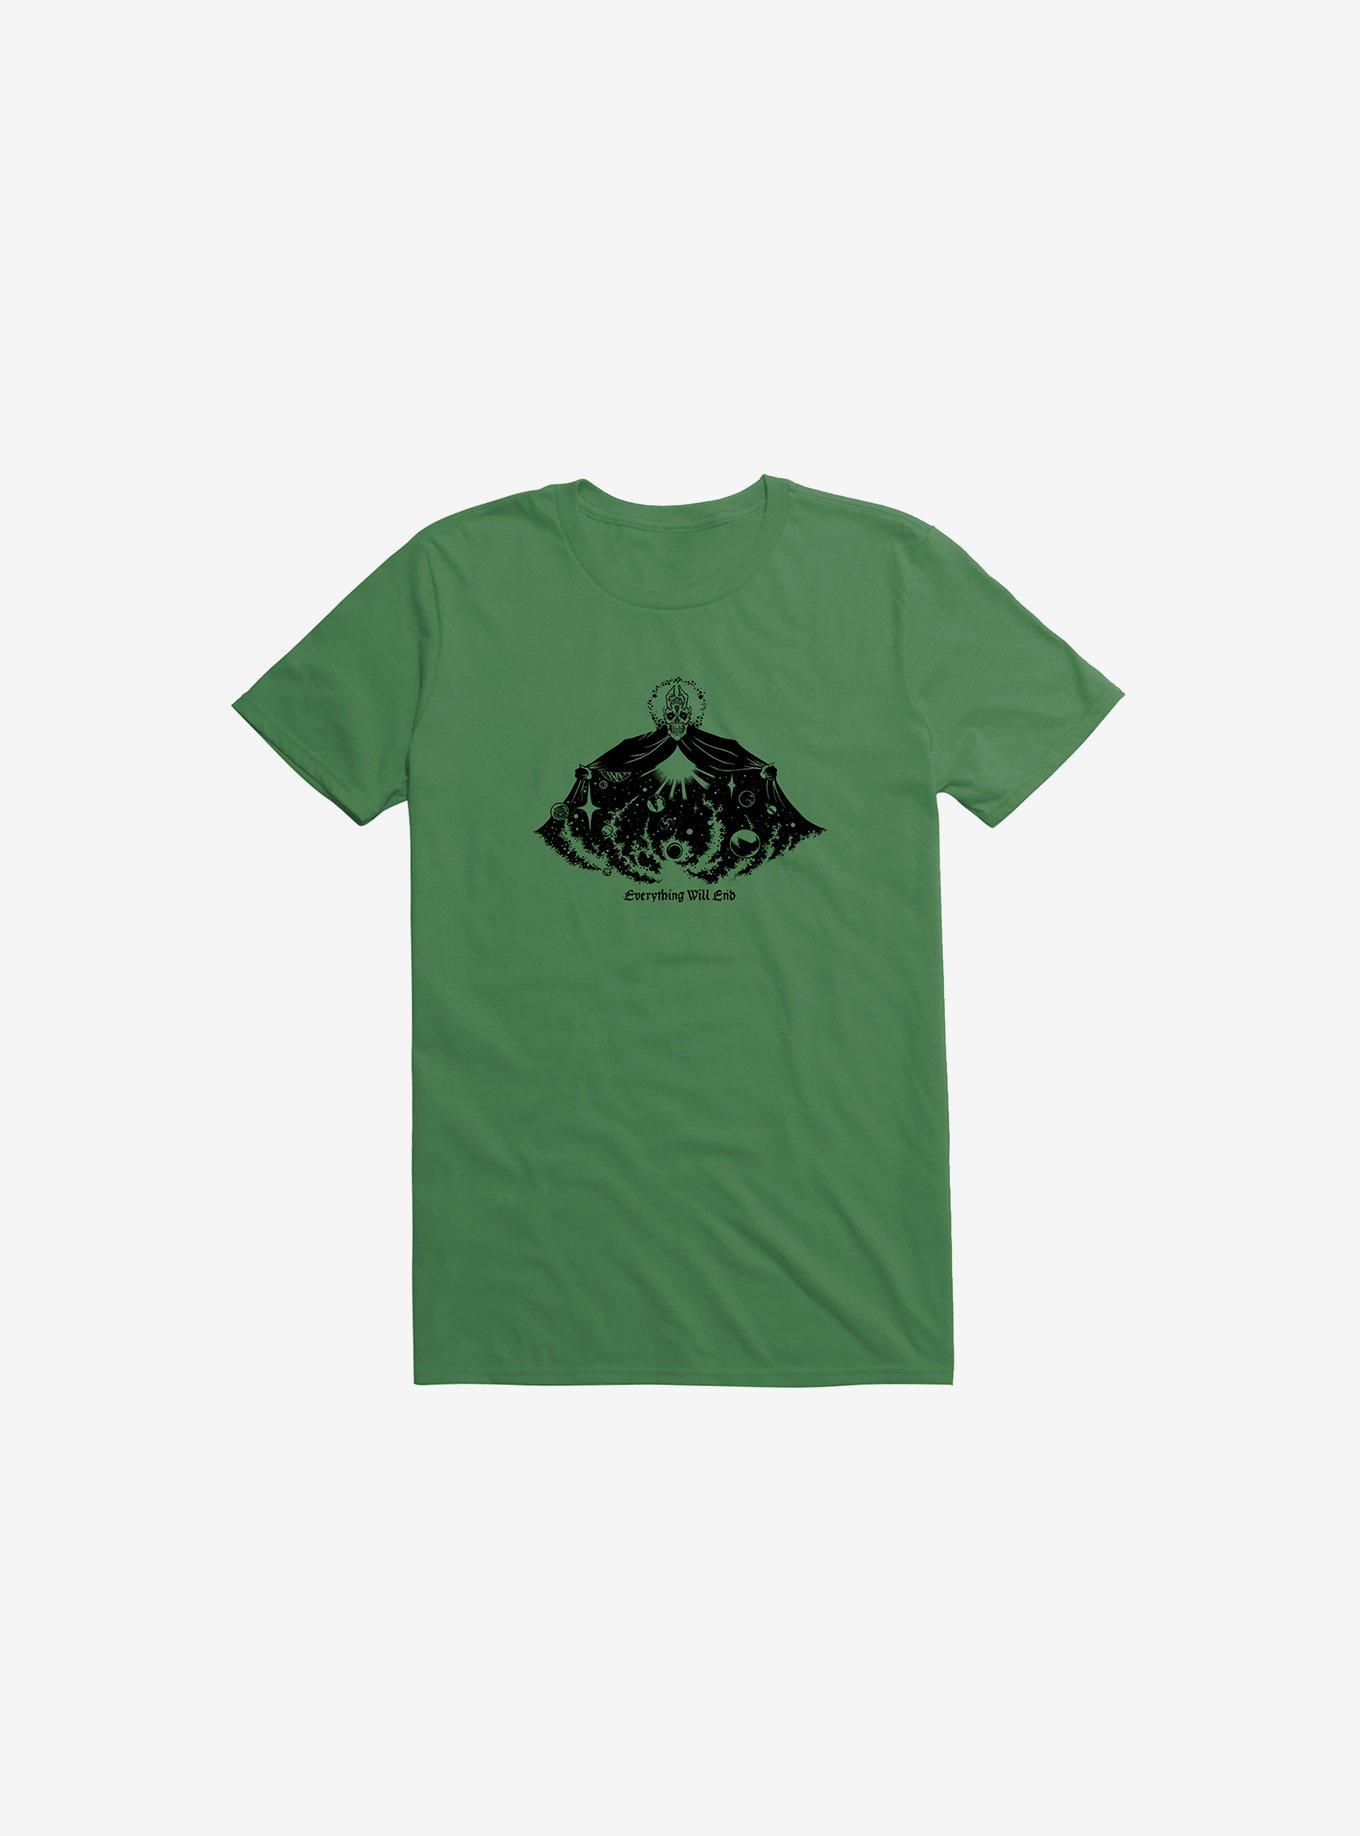 Everything Will End T-Shirt, KELLY GREEN, hi-res